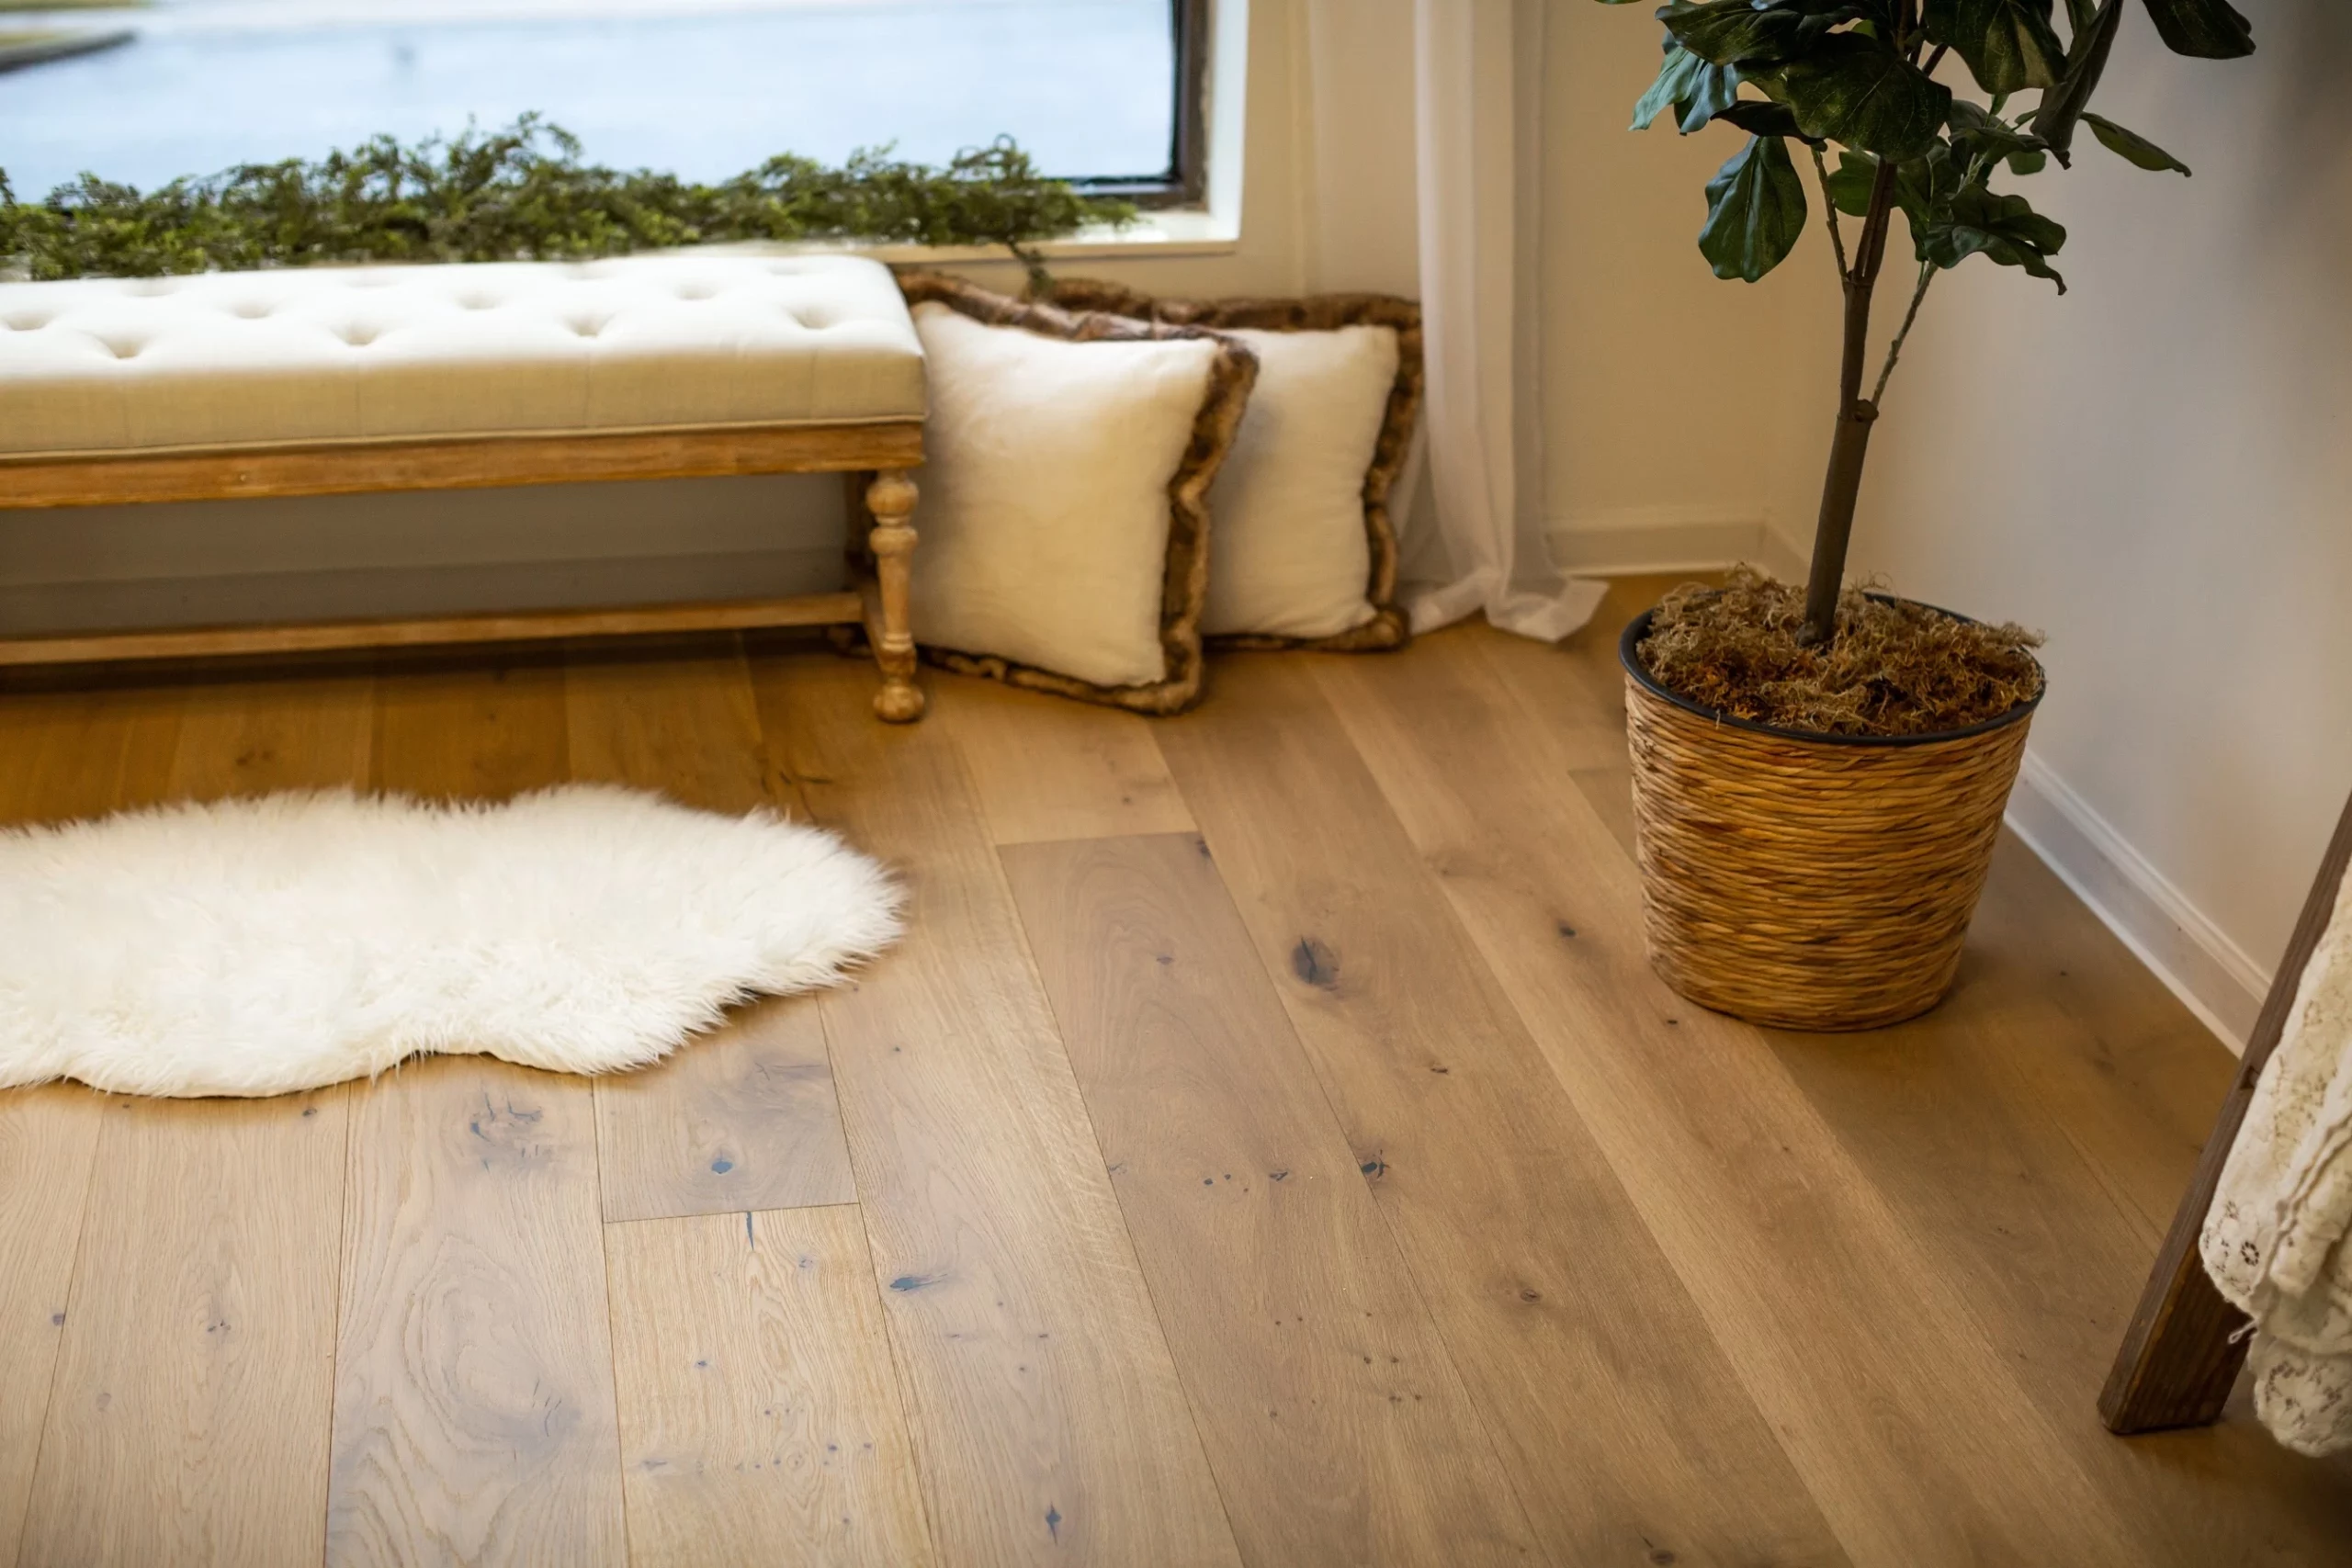 A living room with an engineered Euro oak floor and a sheepskin rug.